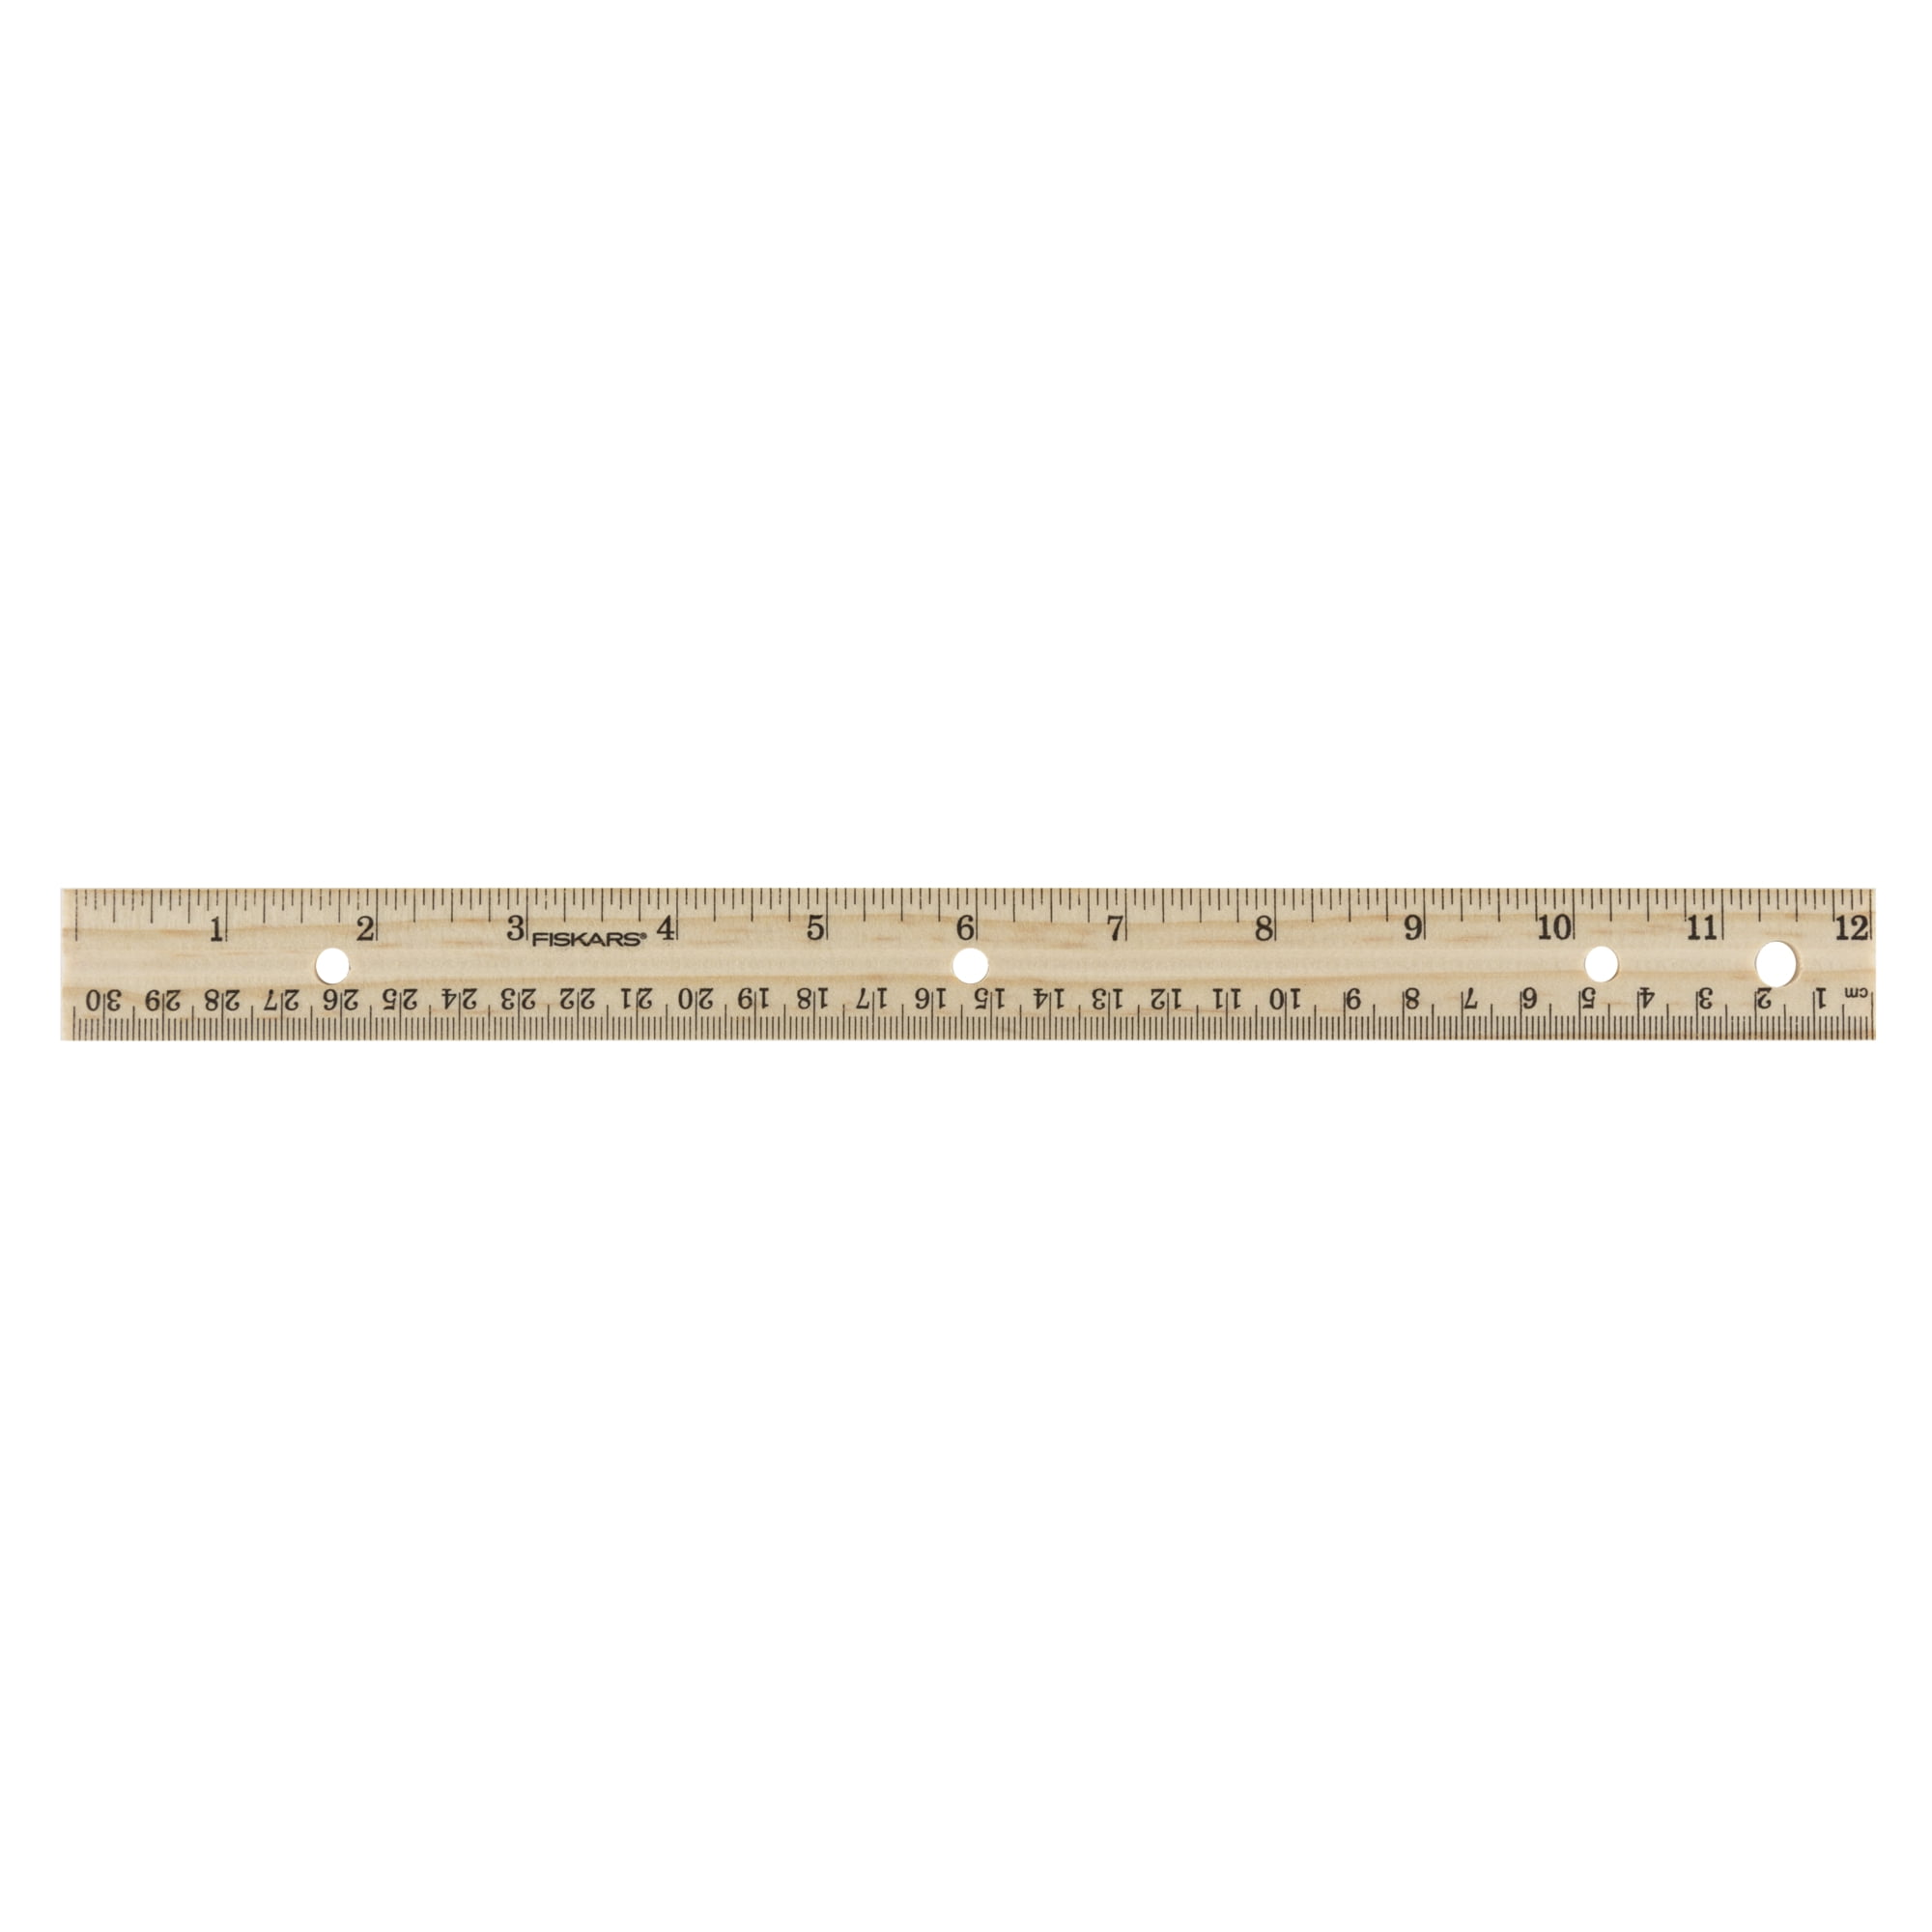 8 Pcs Wooden Rulers 12in 30cm Great for Home SCHOOL and Office USES!!!!!! 